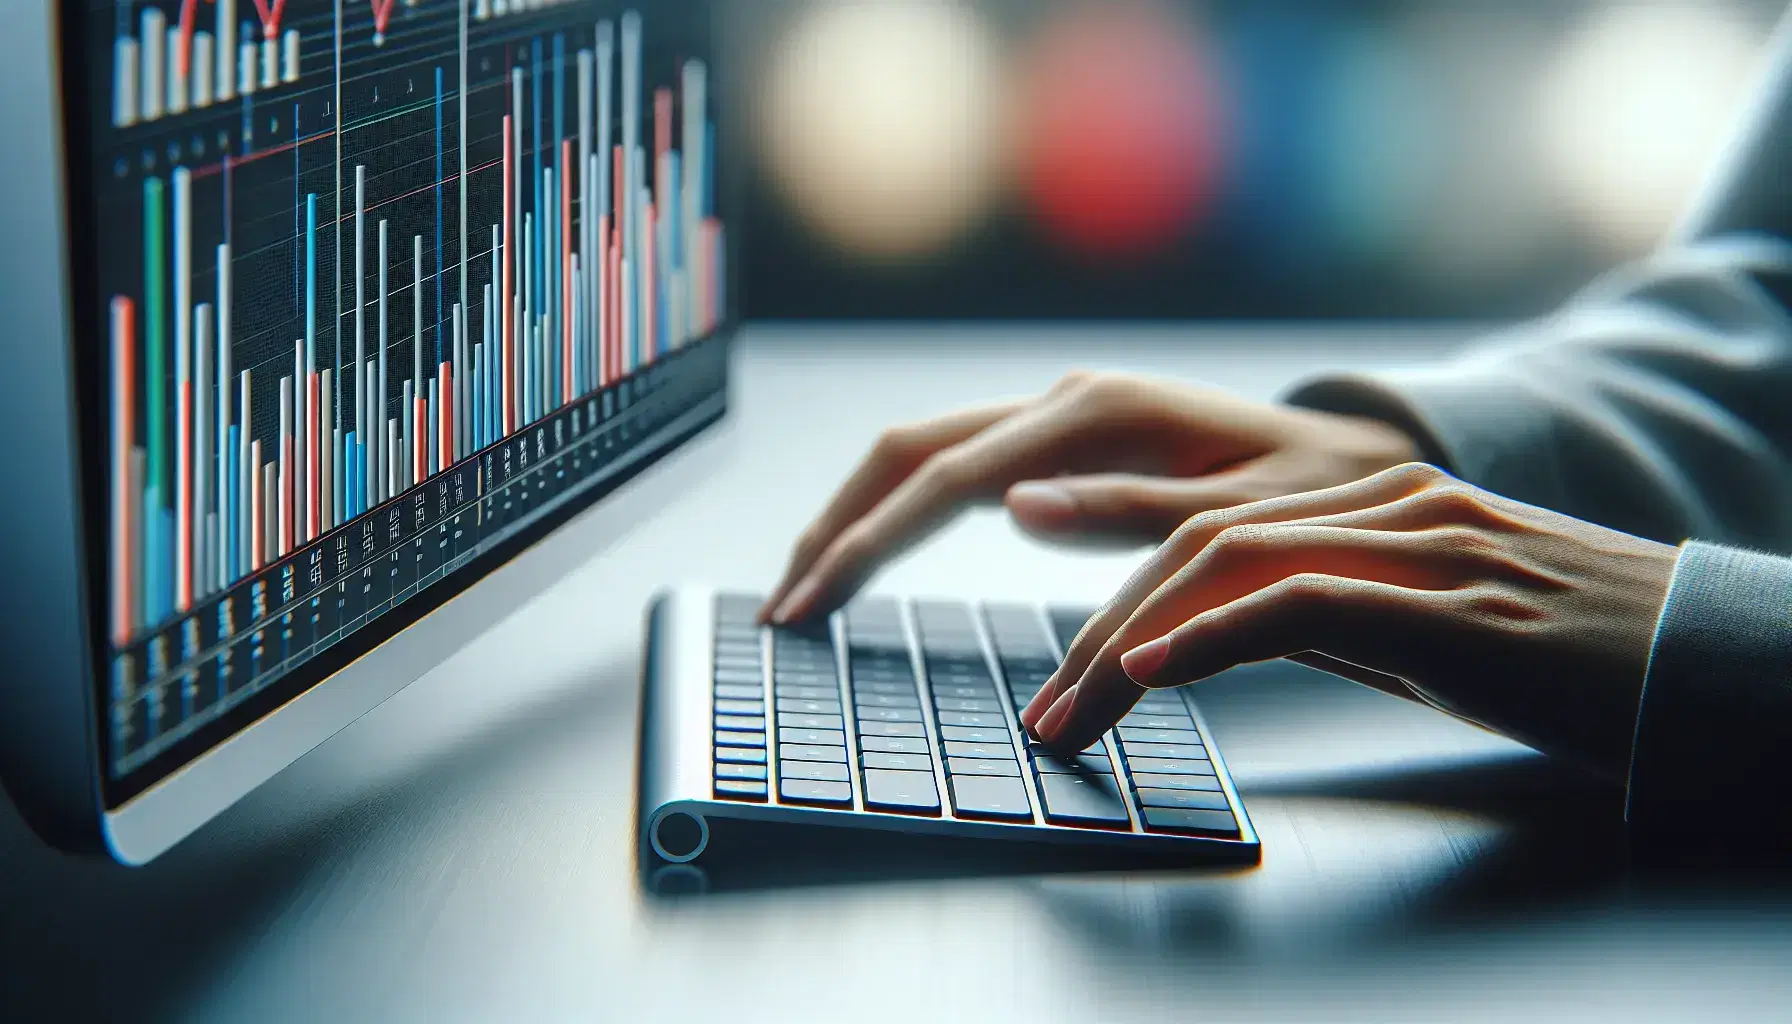 Hands above a modern black and silver keyboard with screen background with colorful bar graphs indicating data analysis.